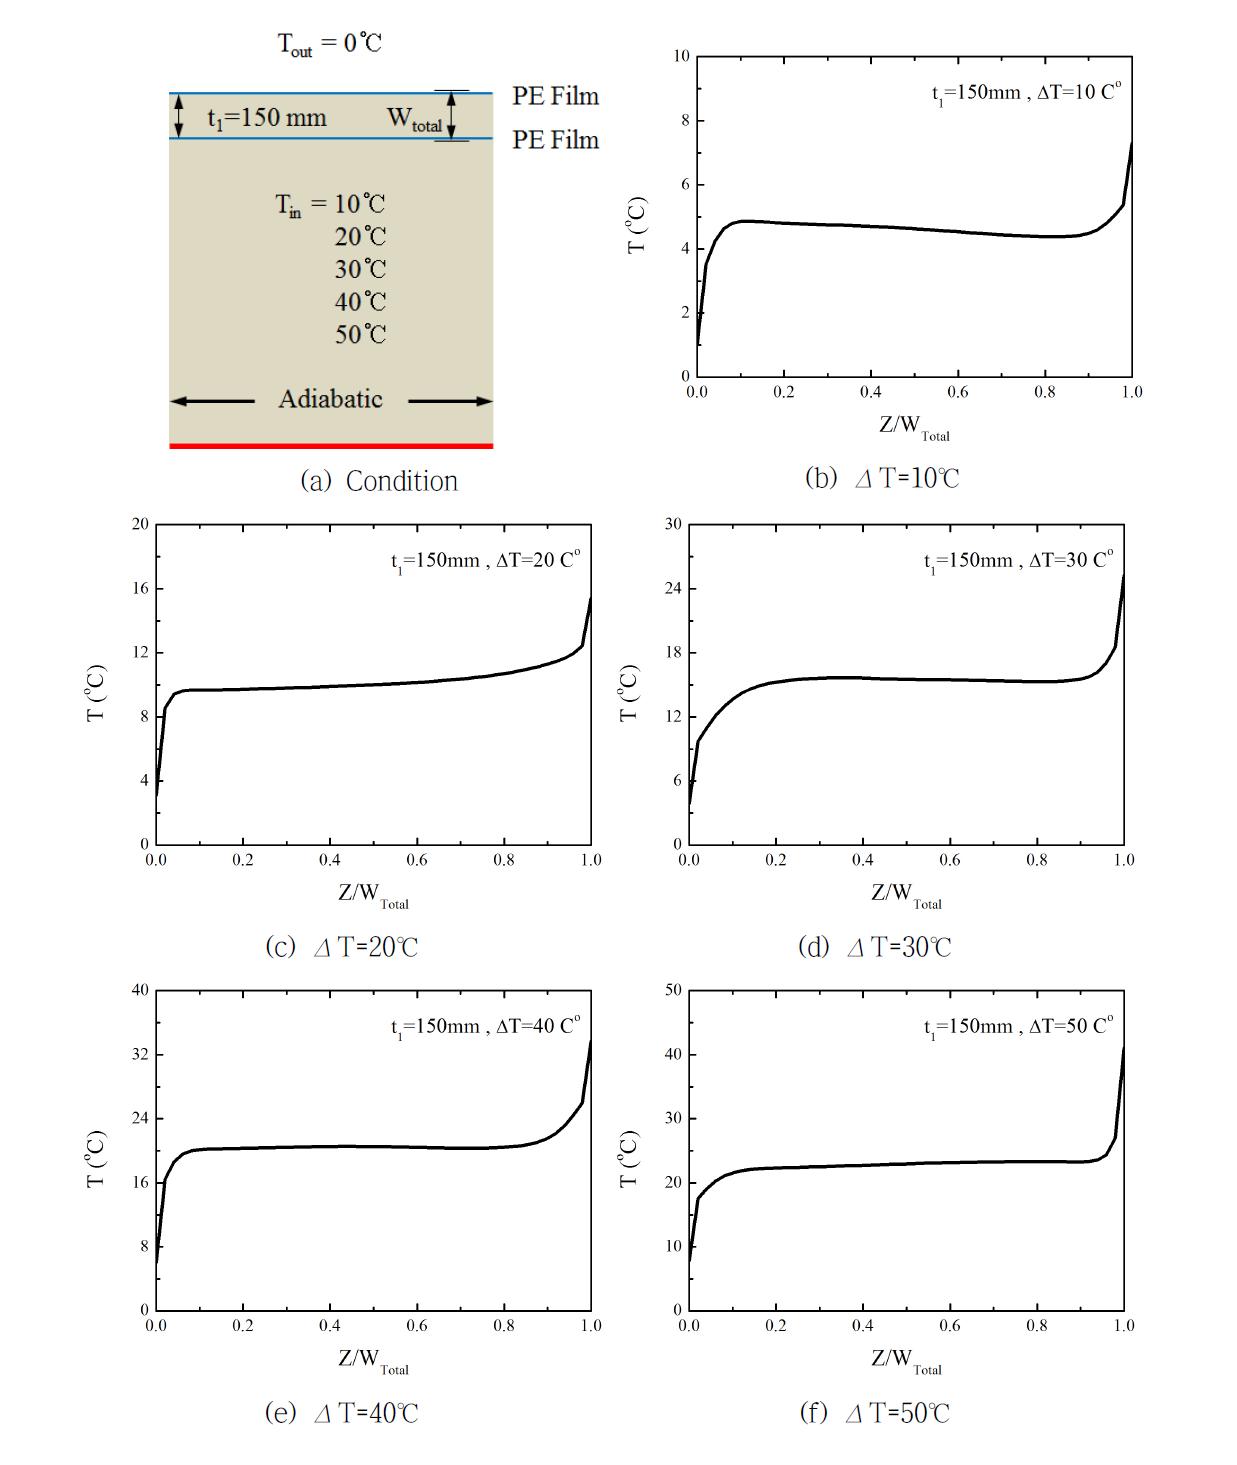 Distributions of inner temperature with variation of temperature difference for Polyethylene film 2 layers at film-to-film distances 150mm